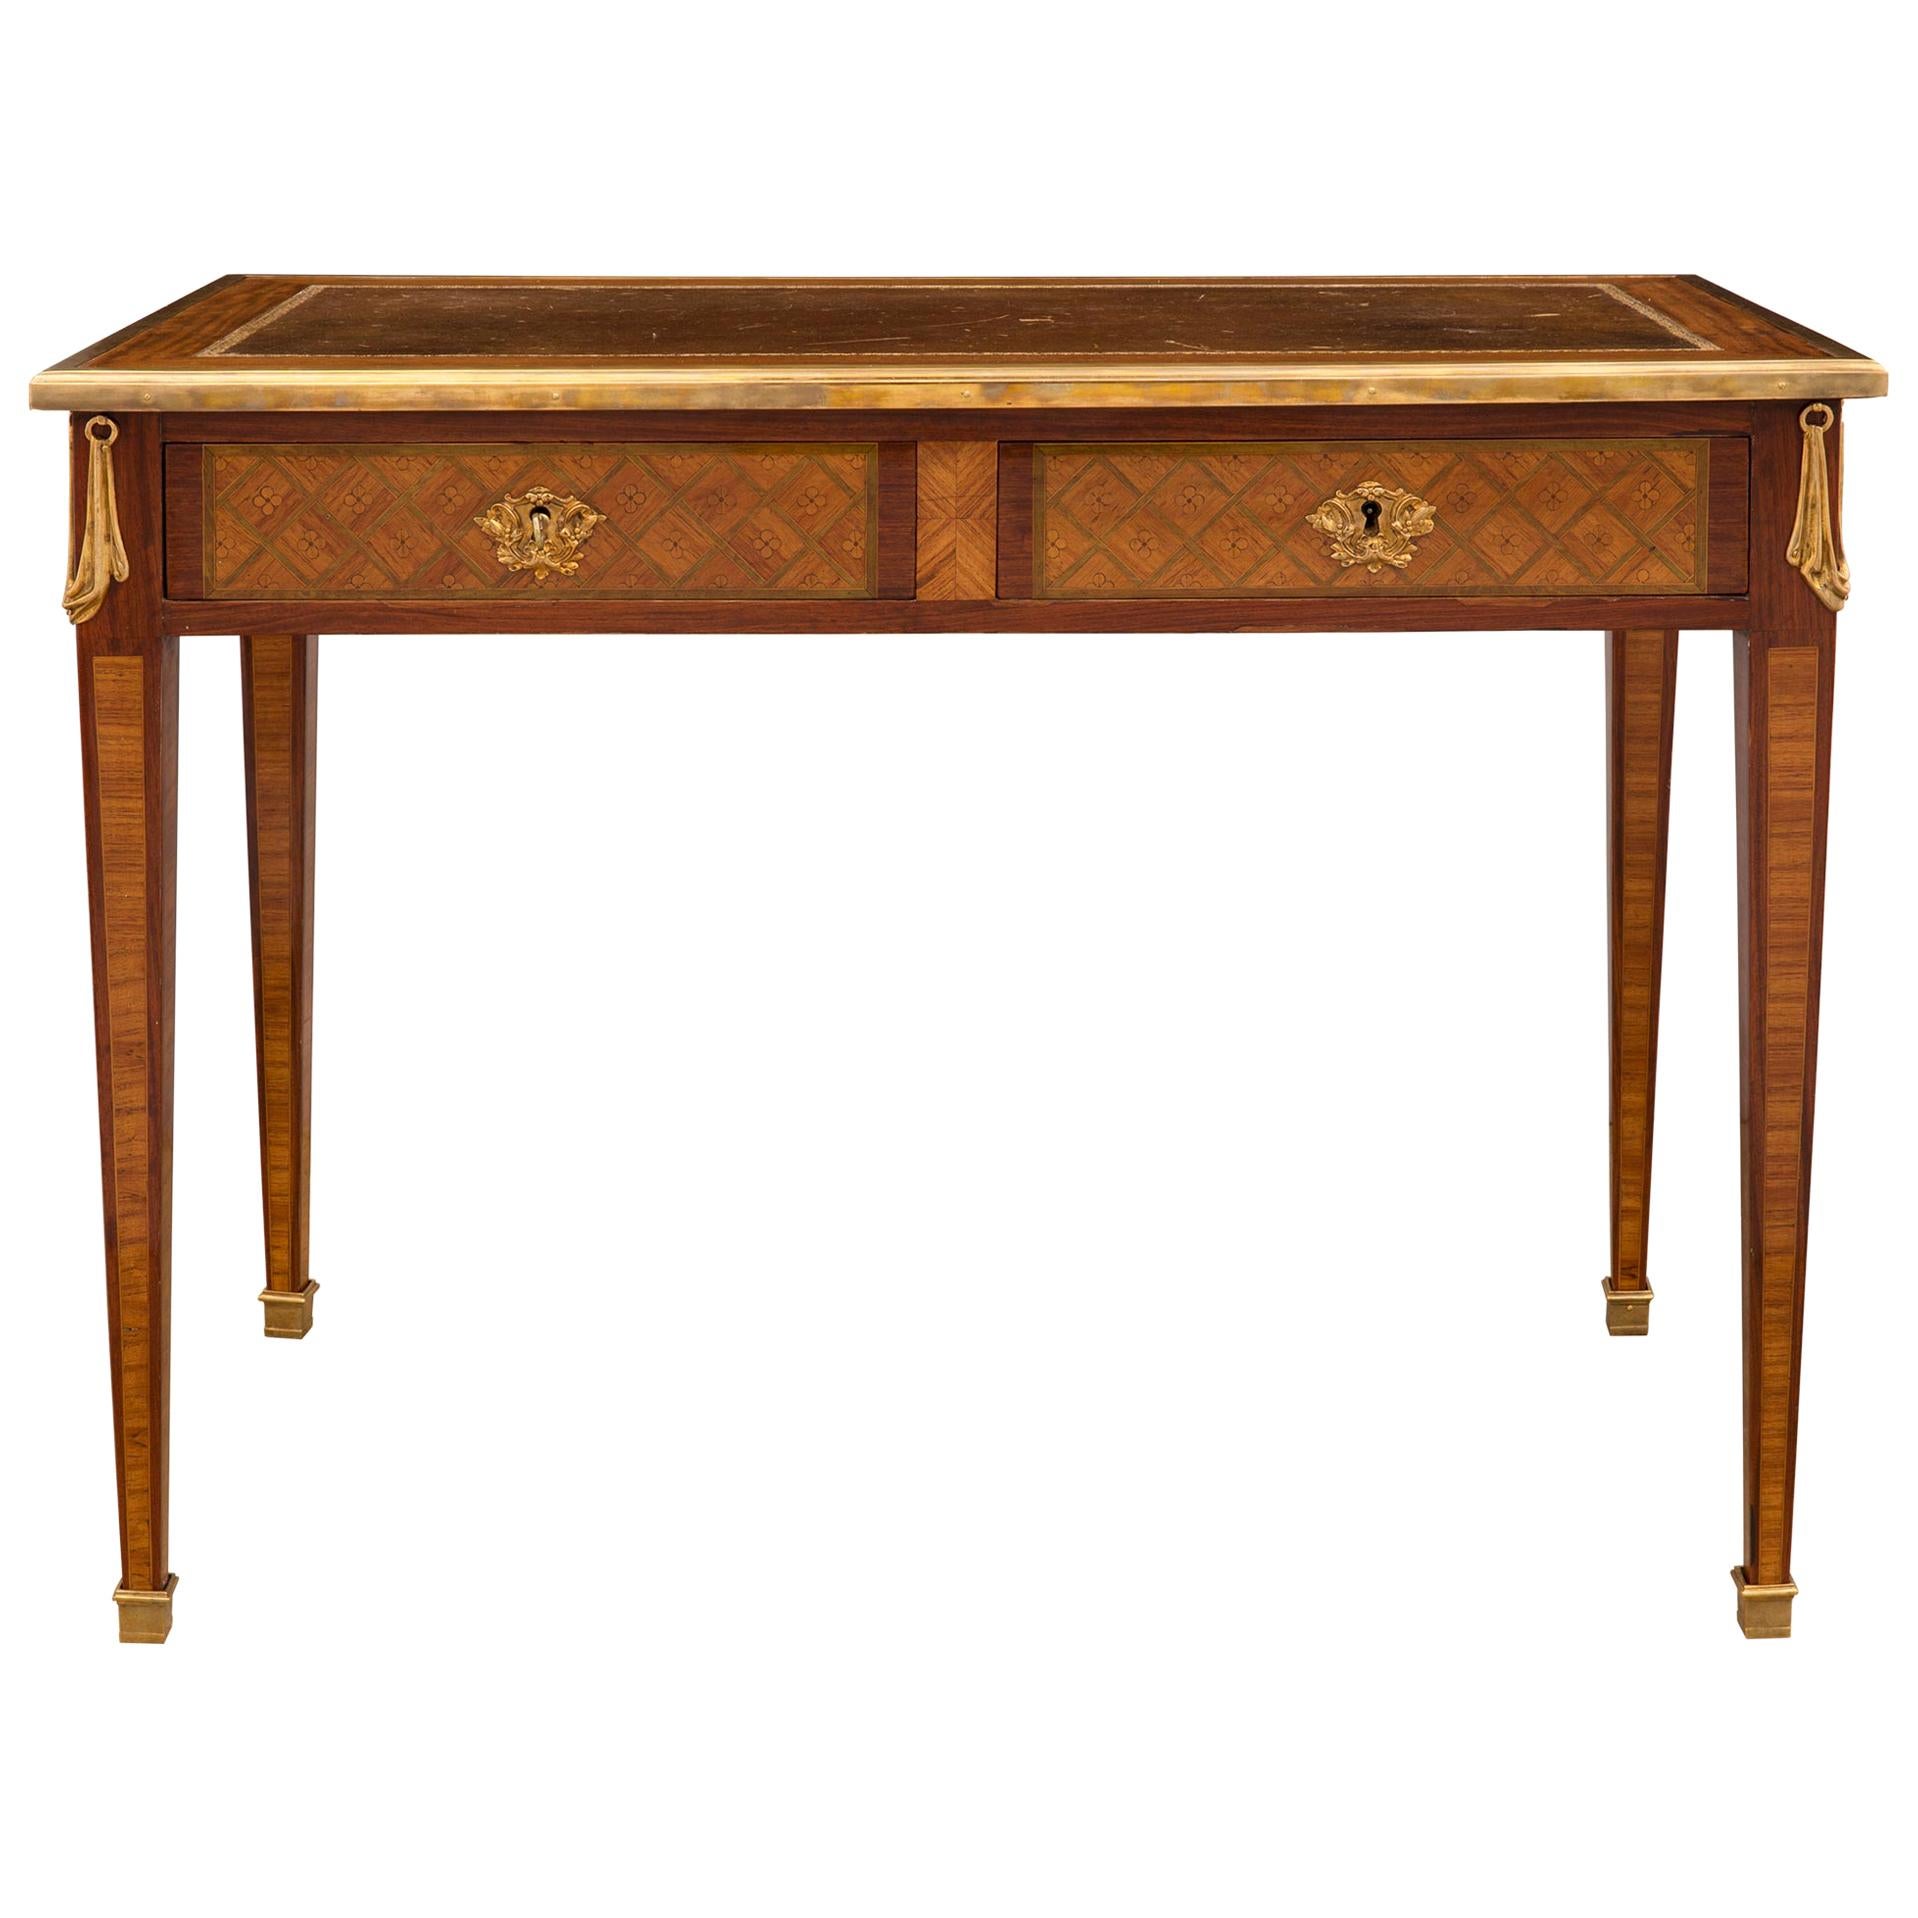 French Mid-19th Century Louis XVI Style Tulipwood, Kingwood and Charmwood Desk